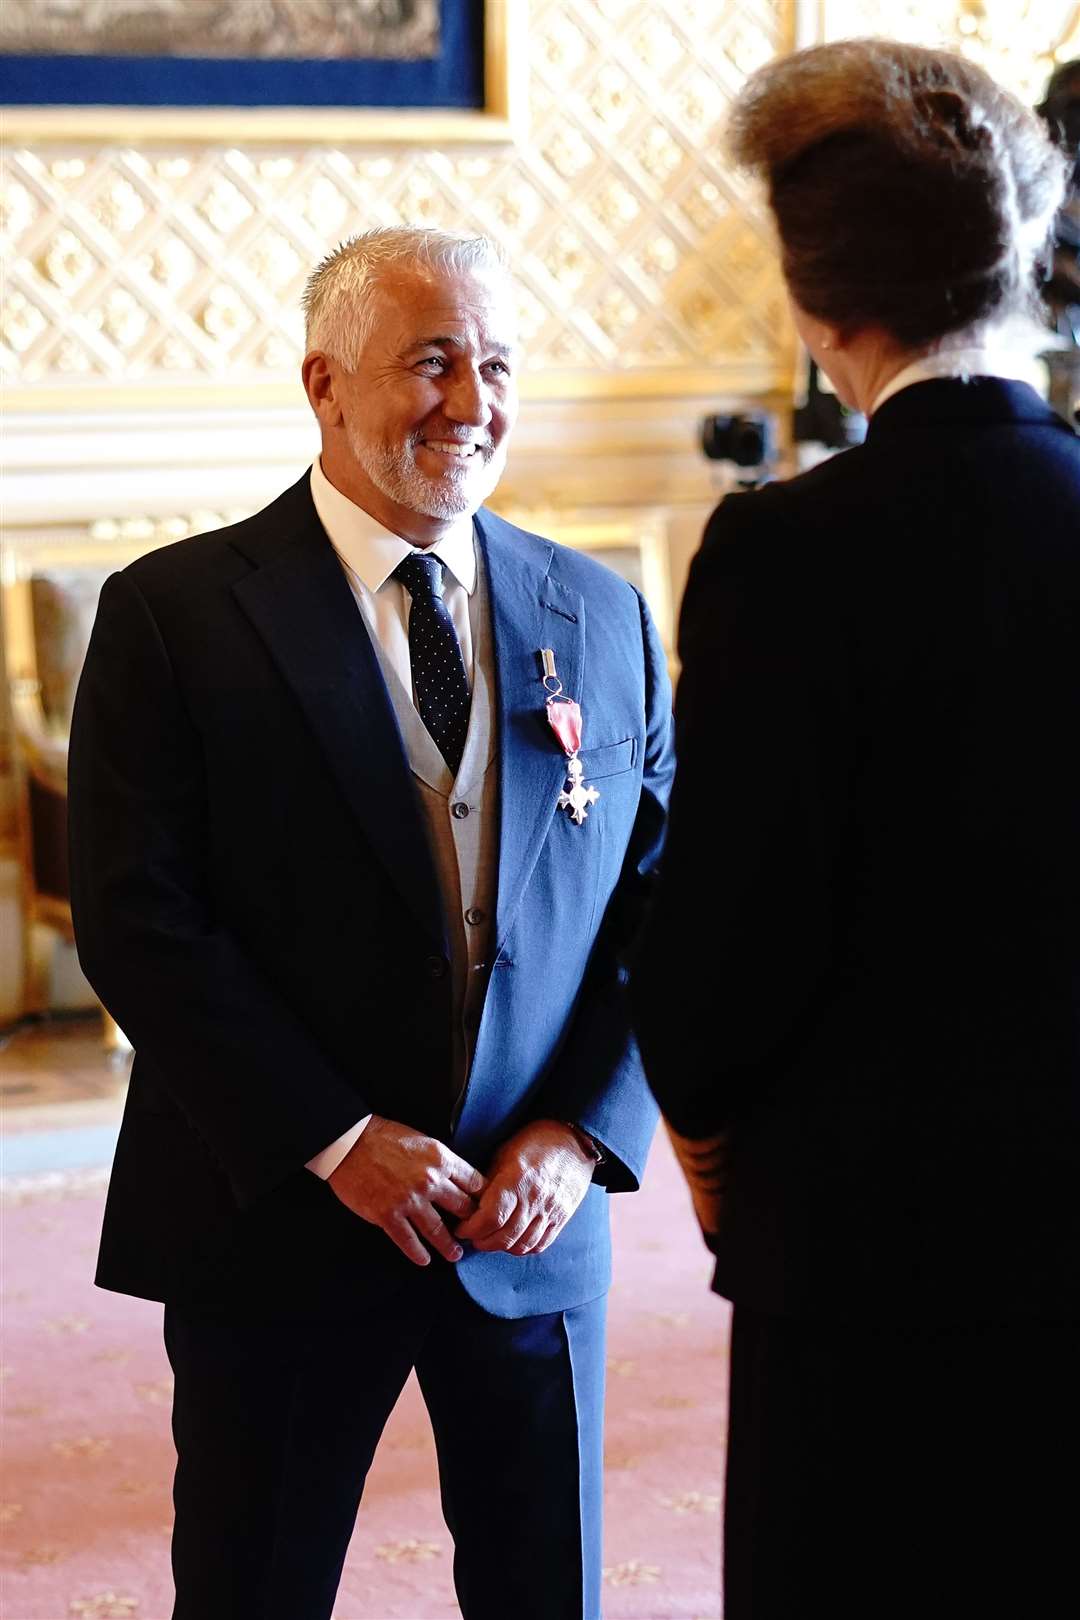 Paul Hollywood smiles as he talks to the Princess Royal during the ceremony (Aaron Chown/PA)